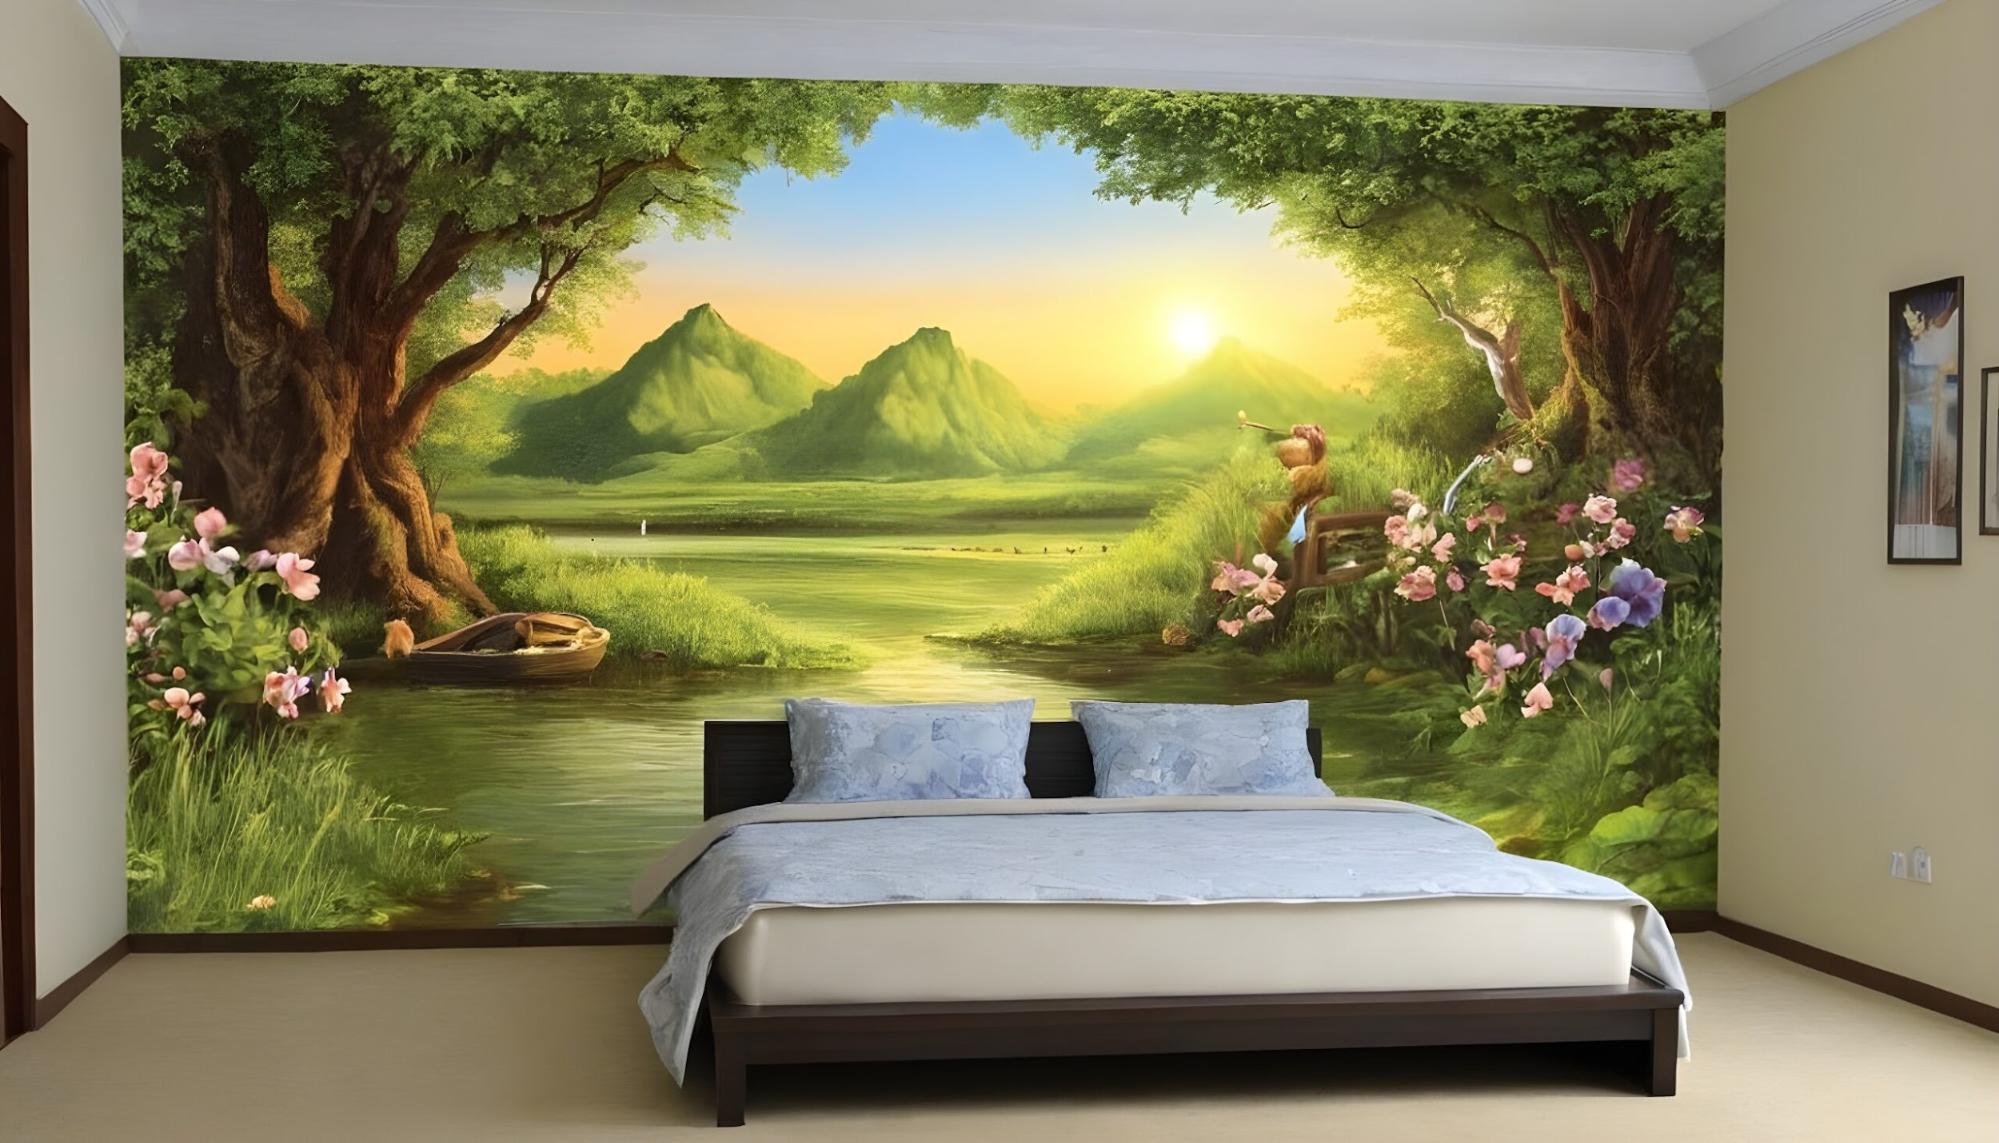 3D wall paper paint on bed room wall